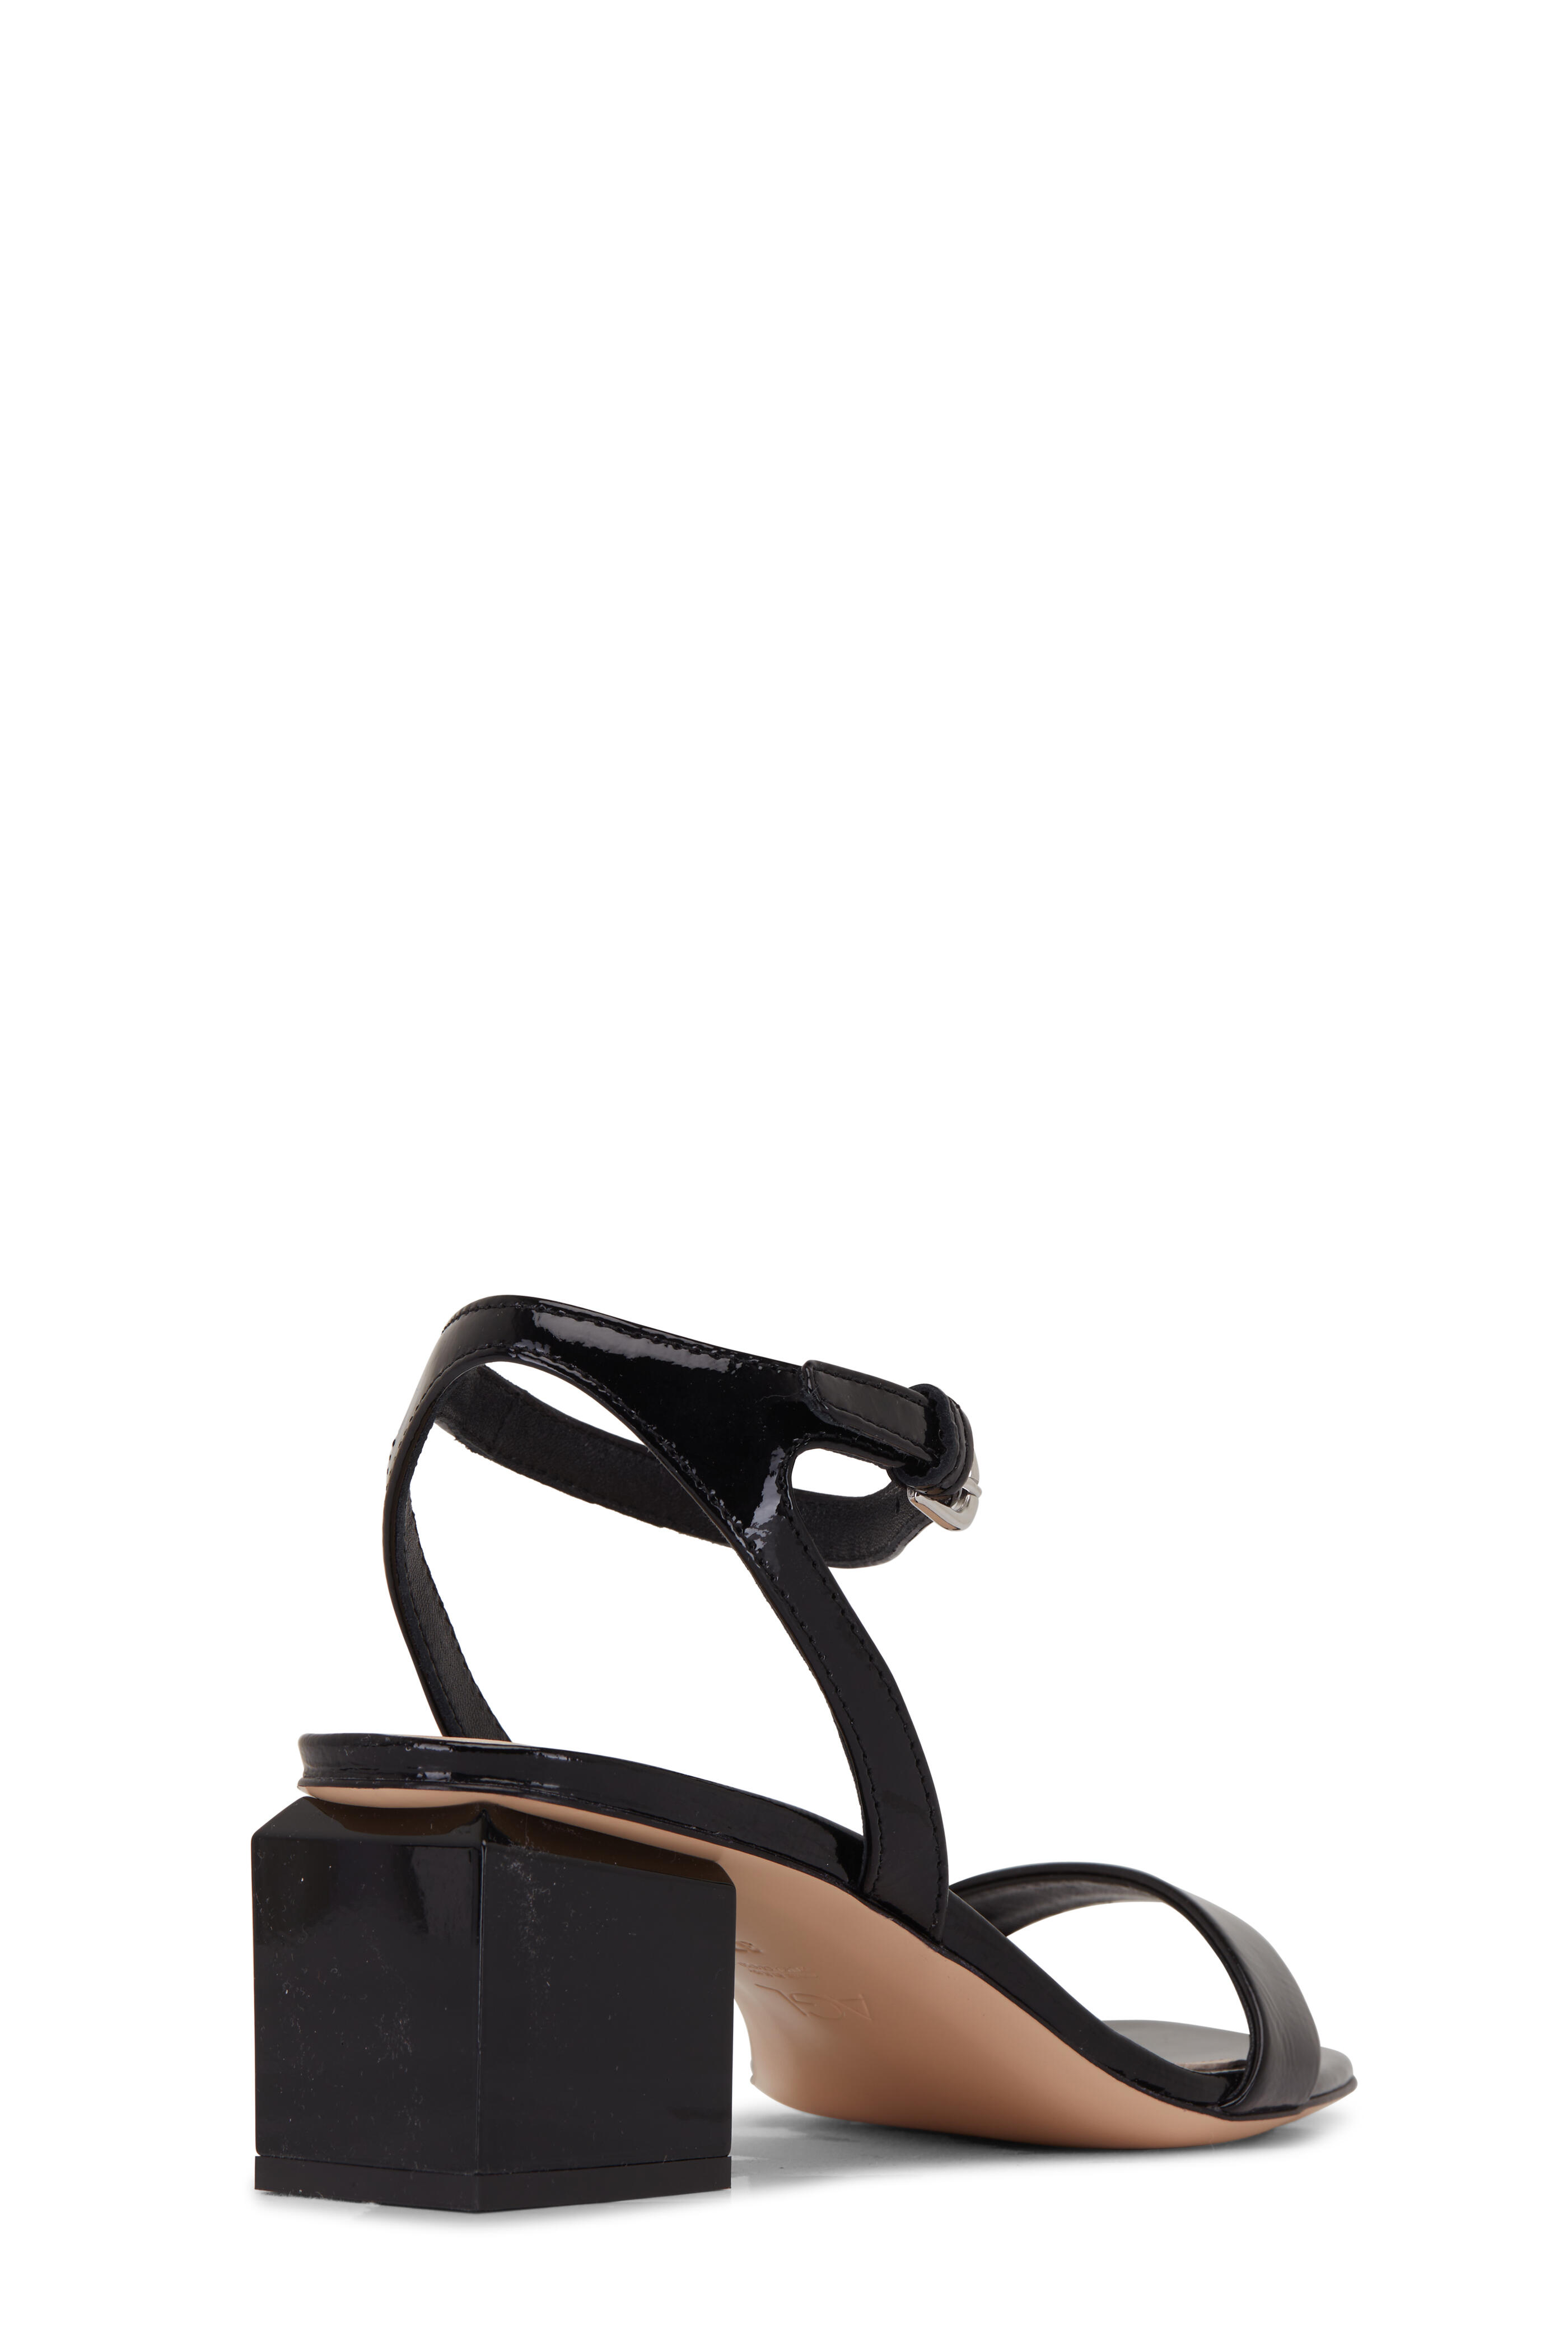 AGL Angie Black Ankle Strap Sandal, 65mm Mitchell Stores